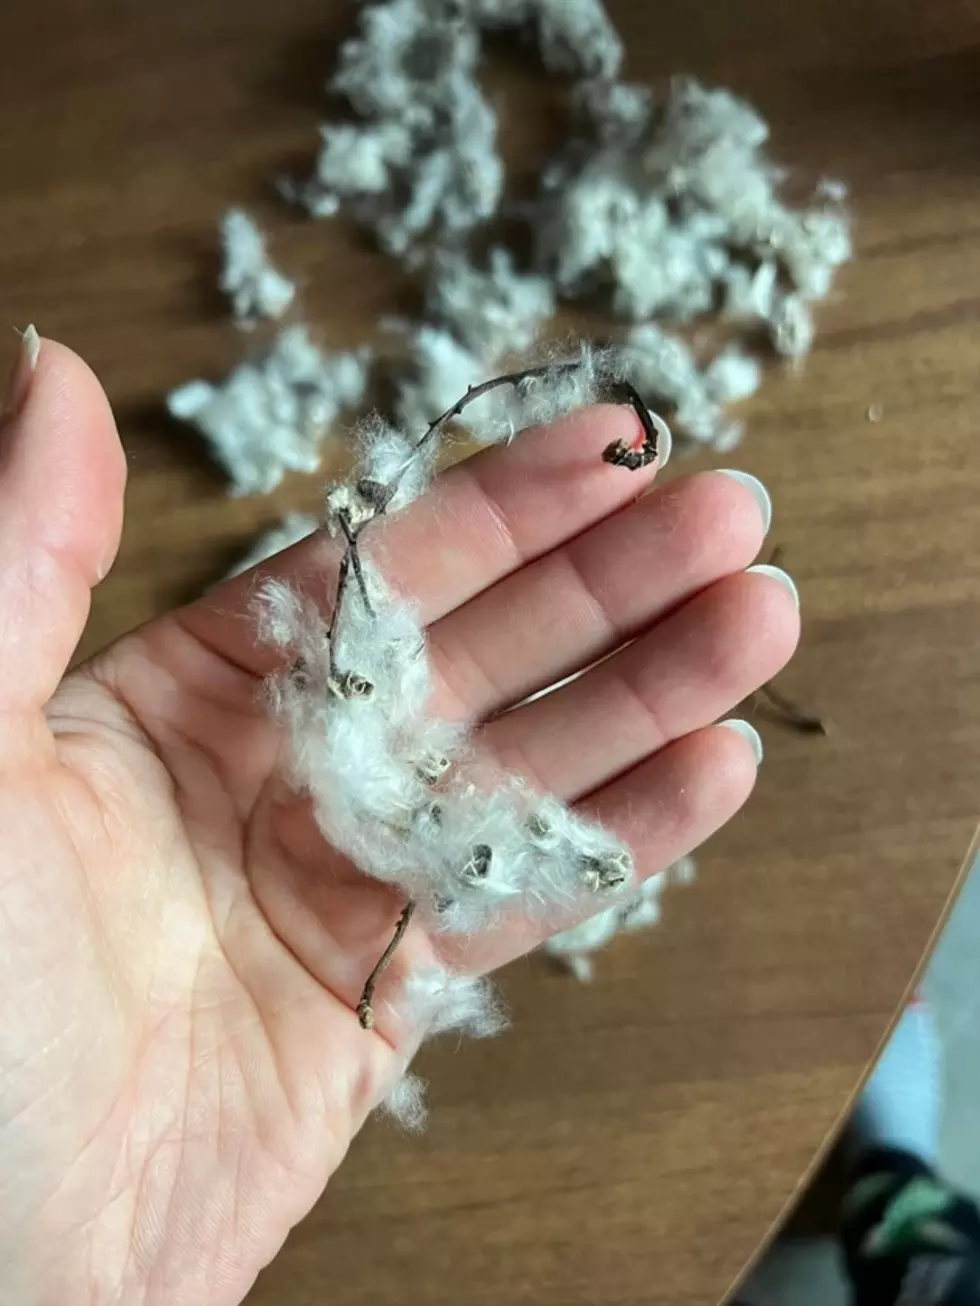 What Are Those Fluffy Cotton Things Flying Around Massachusetts?